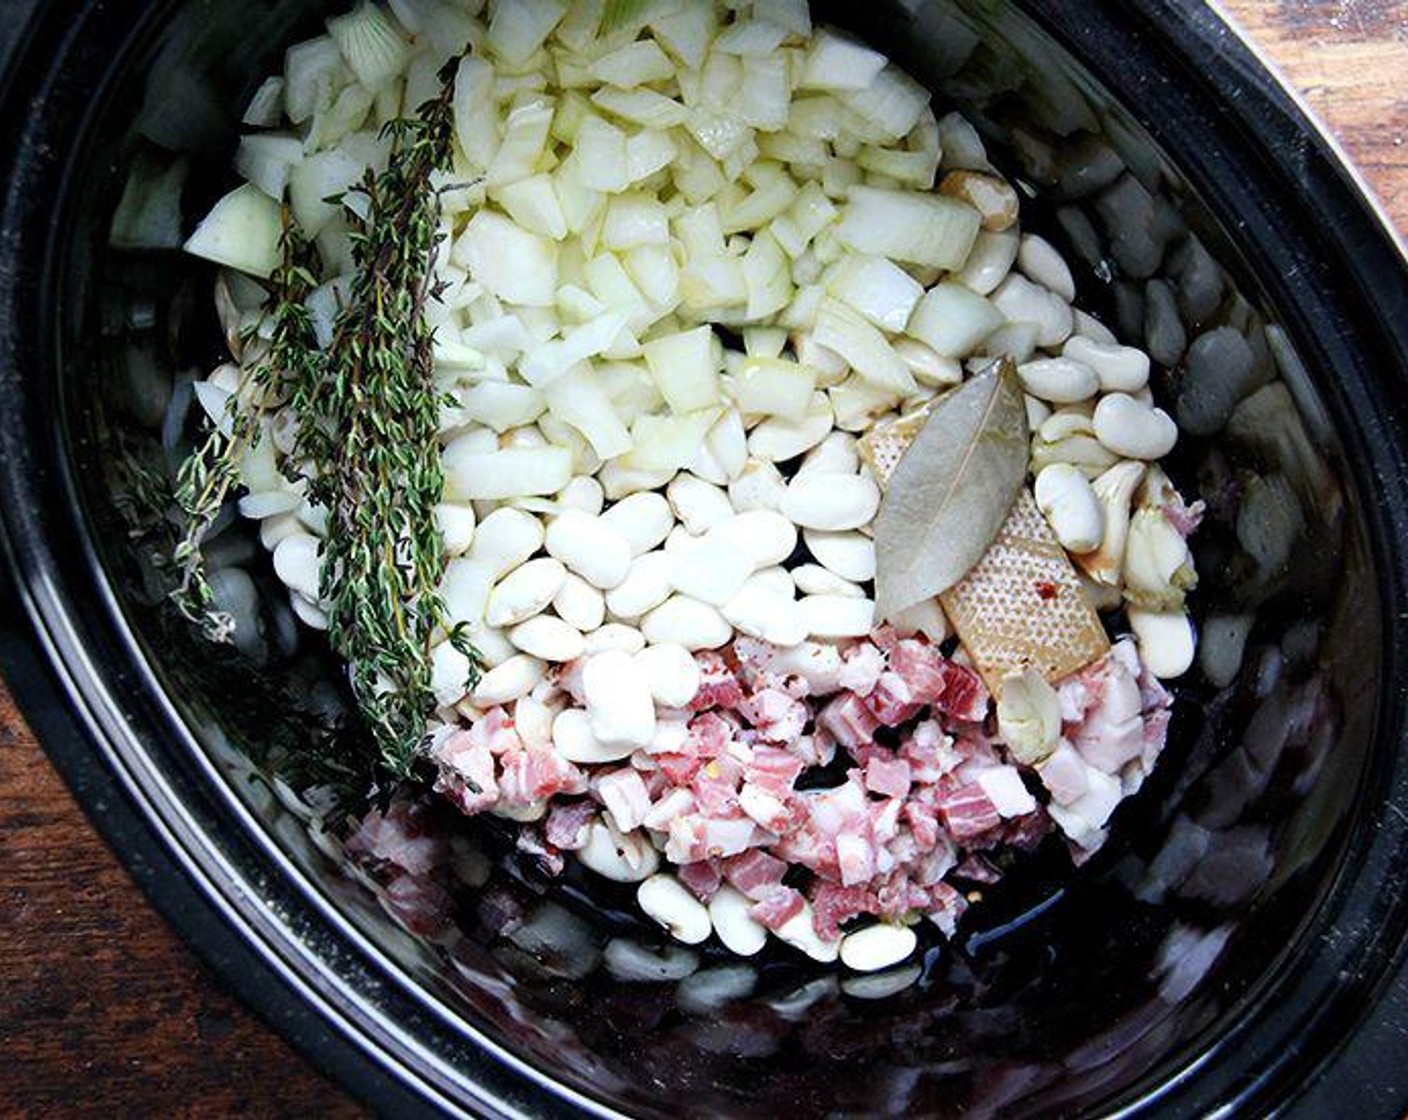 step 1 Place the Dry White Beans (1 cup), Bay Leaf (1), Crushed Red Pepper Flakes (1 pinch), Garlic (2 cloves), Onions (2), Fresh Thyme (3 sprigs), and Pancetta (1/4 cup) into your crockpot.